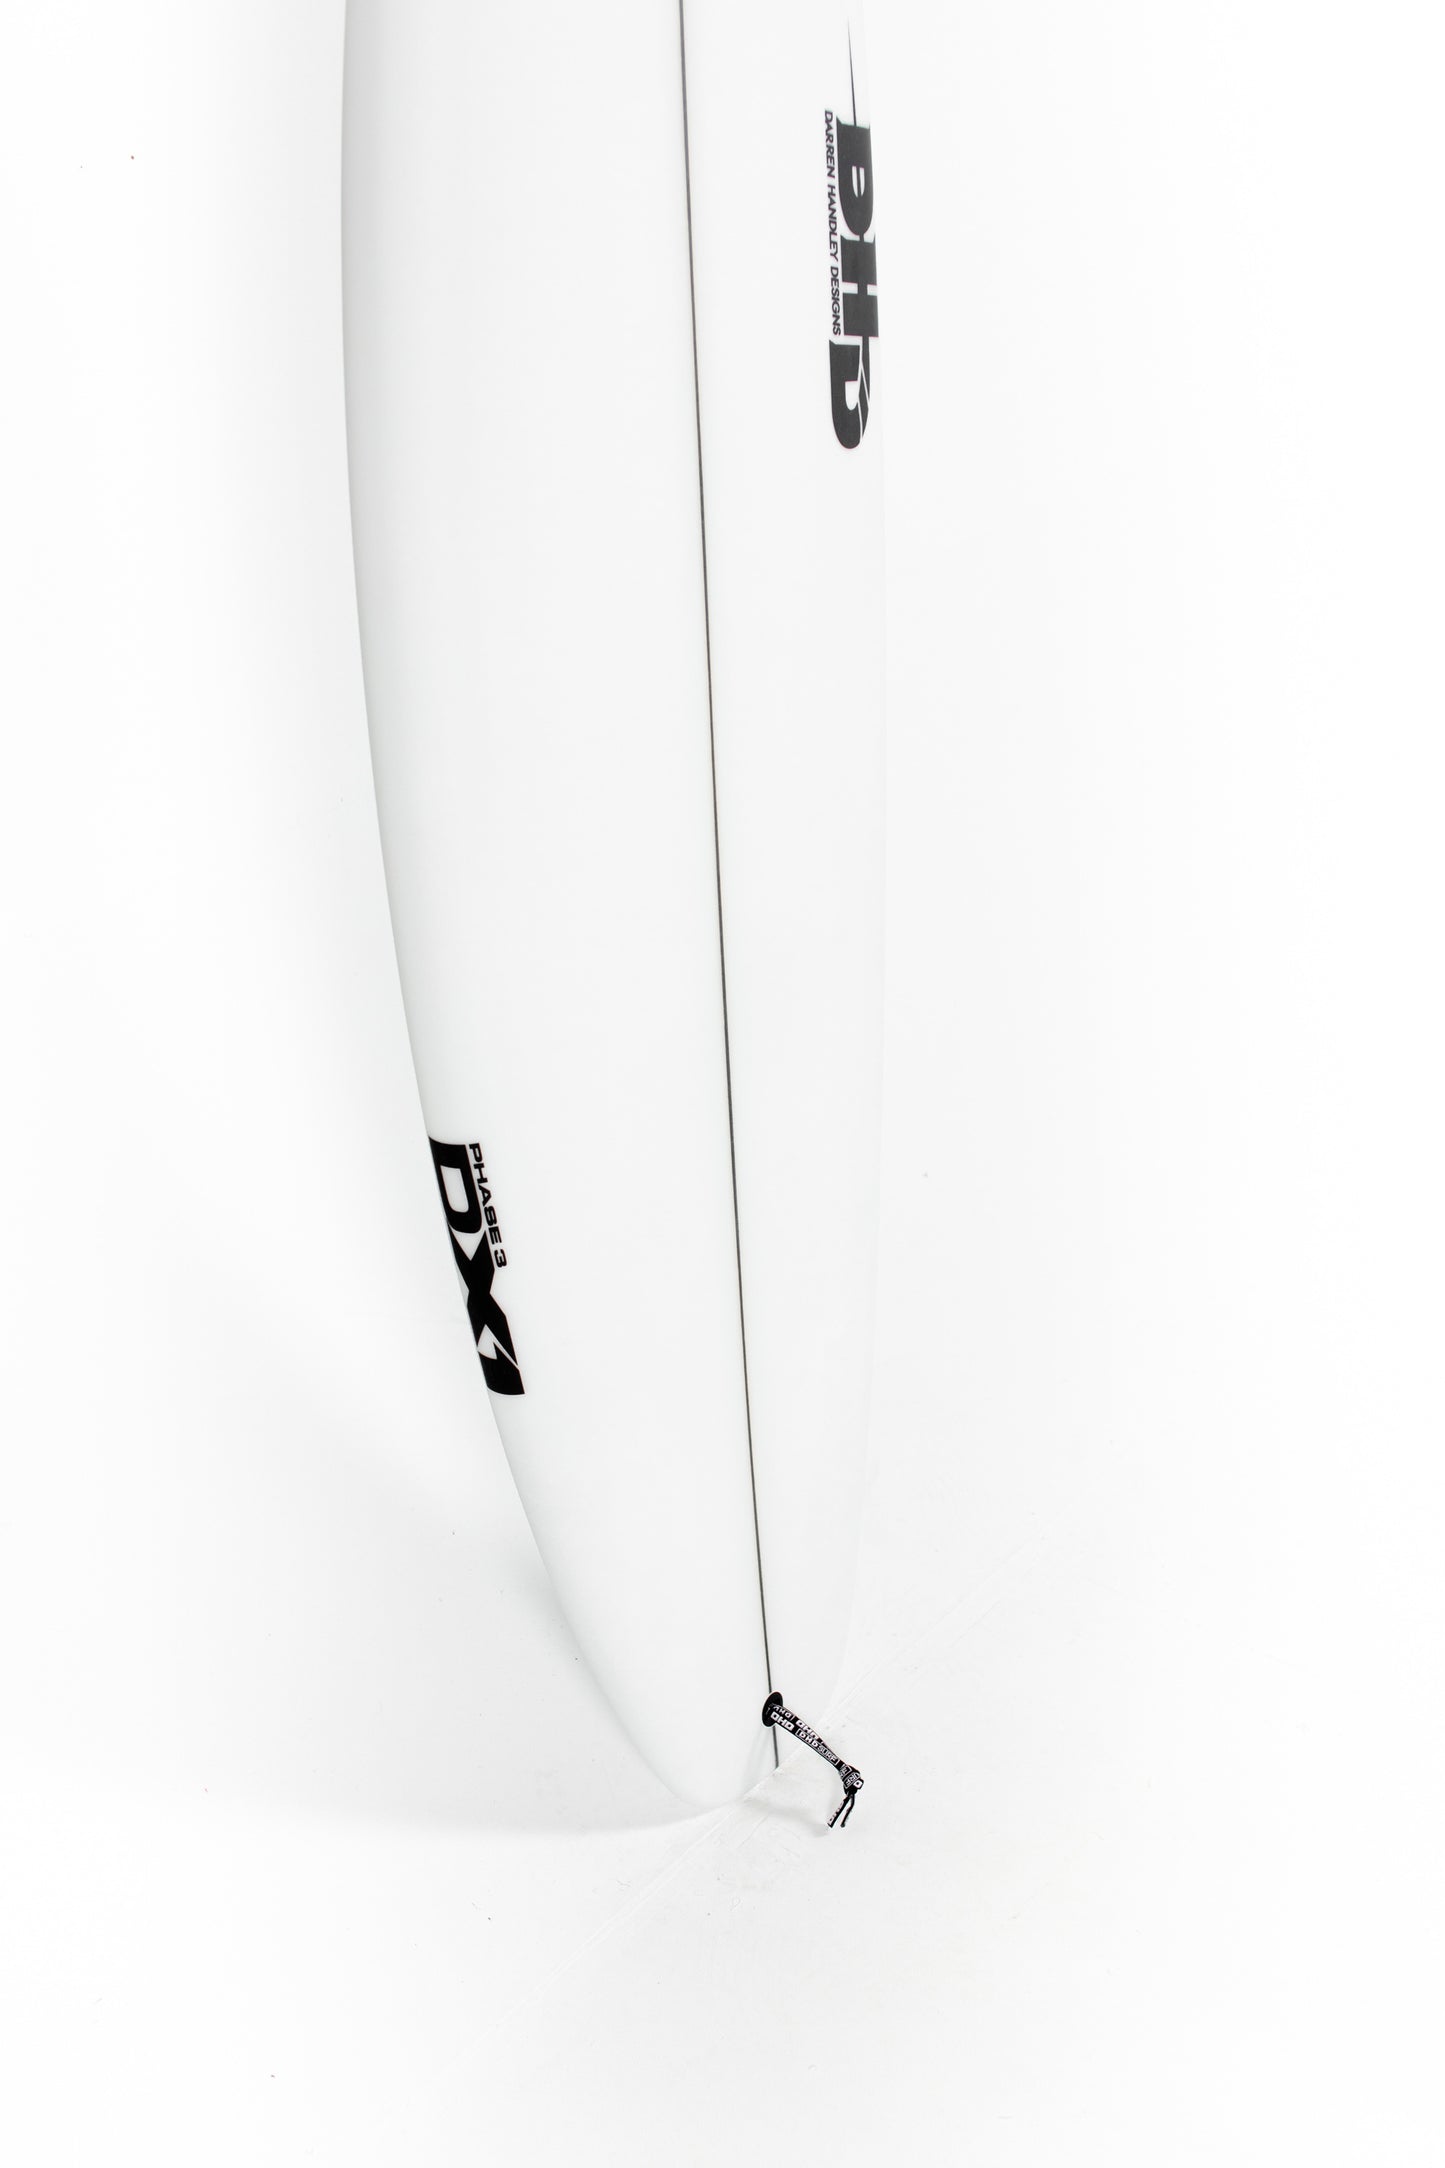 
                  
                    Pukas-Surf-Shop-DHD-Surfboards-DX1-Phase-3
                  
                